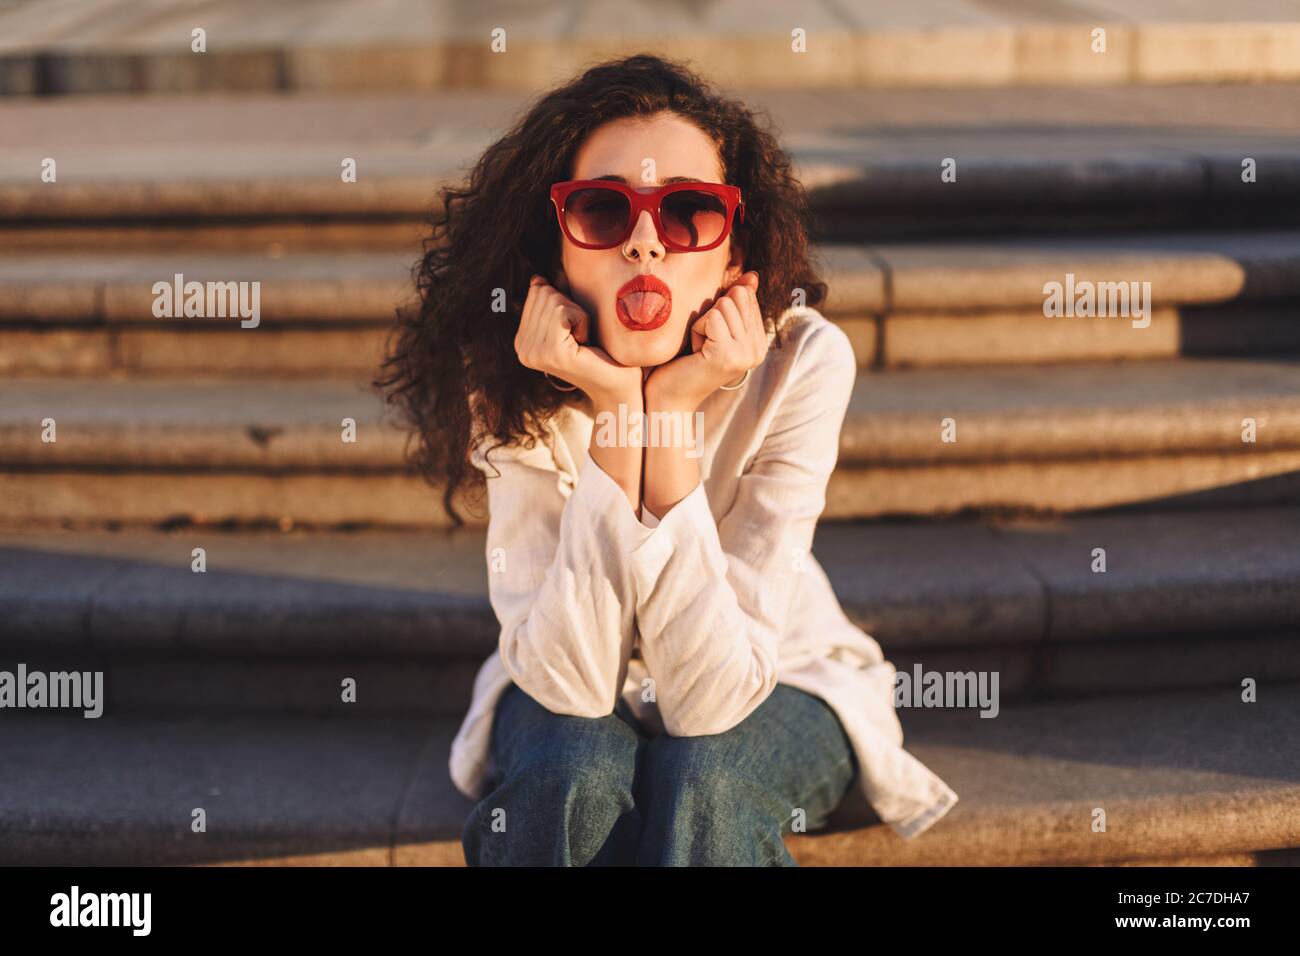 Young pretty woman with dark curly hair in sunglasses and white jacket sitting on stairs on street and dreamily showing tongue on camera Stock Photo